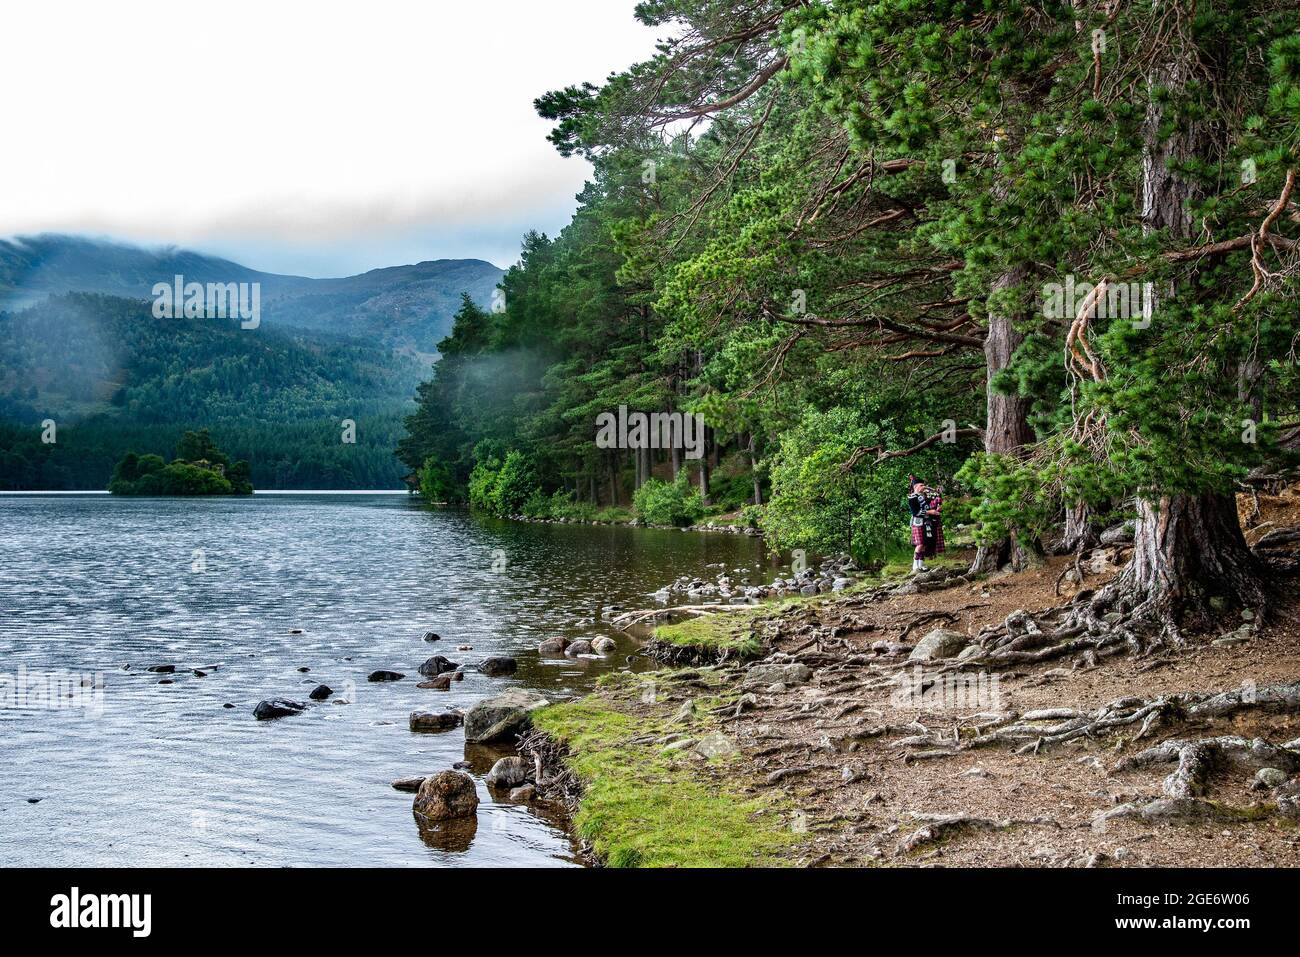 A Scottish piper playing the bagpipes at Loch Eilein, Aviemore, Cairngorms National Park, Scottish Highlands, UK Stock Photo